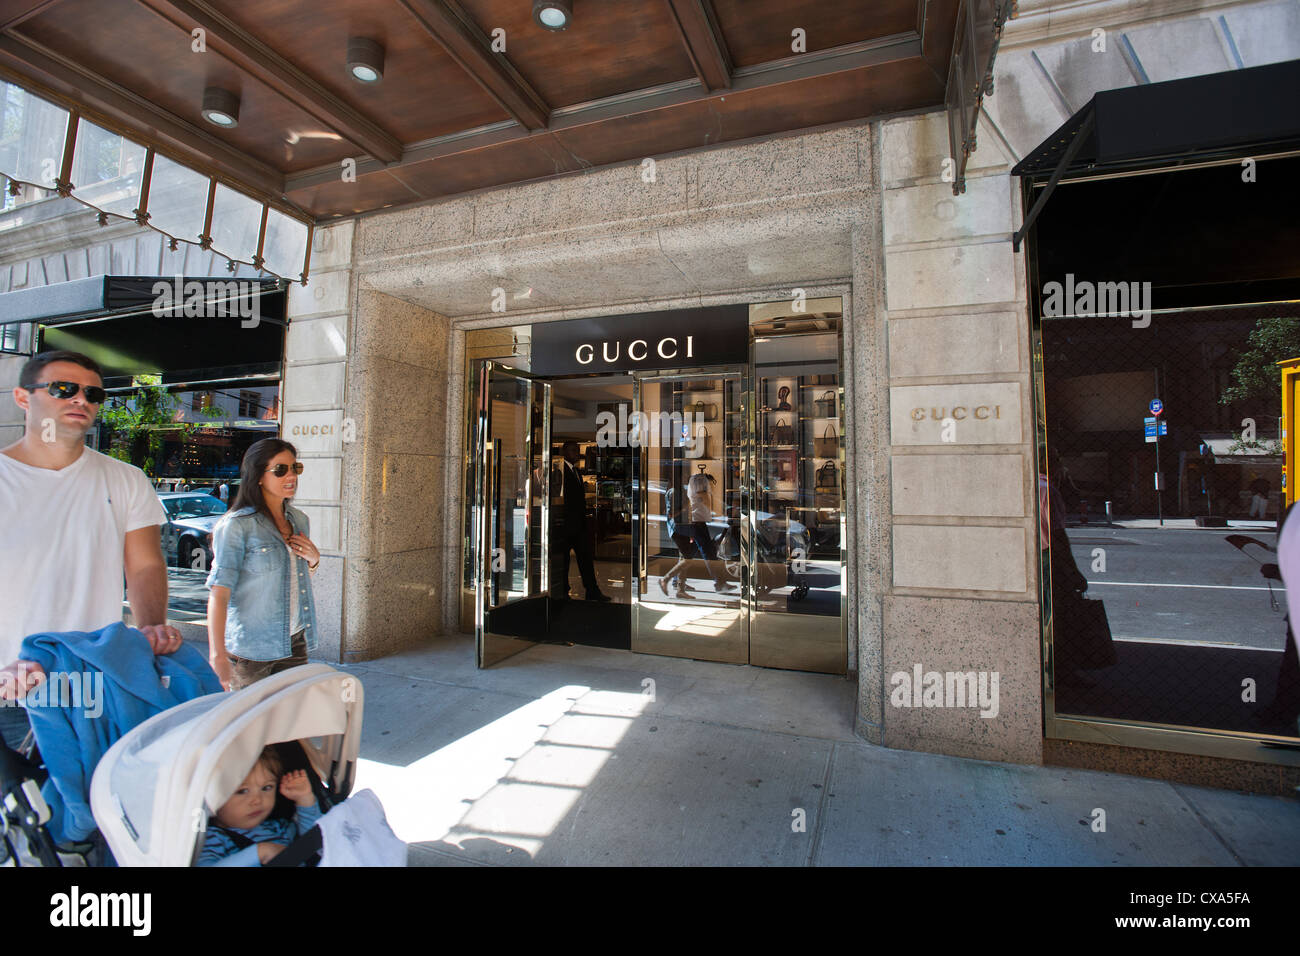 The Gucci store on Madison Avenue in New York Stock Photo, Royalty Free Image: 50625662 - Alamy